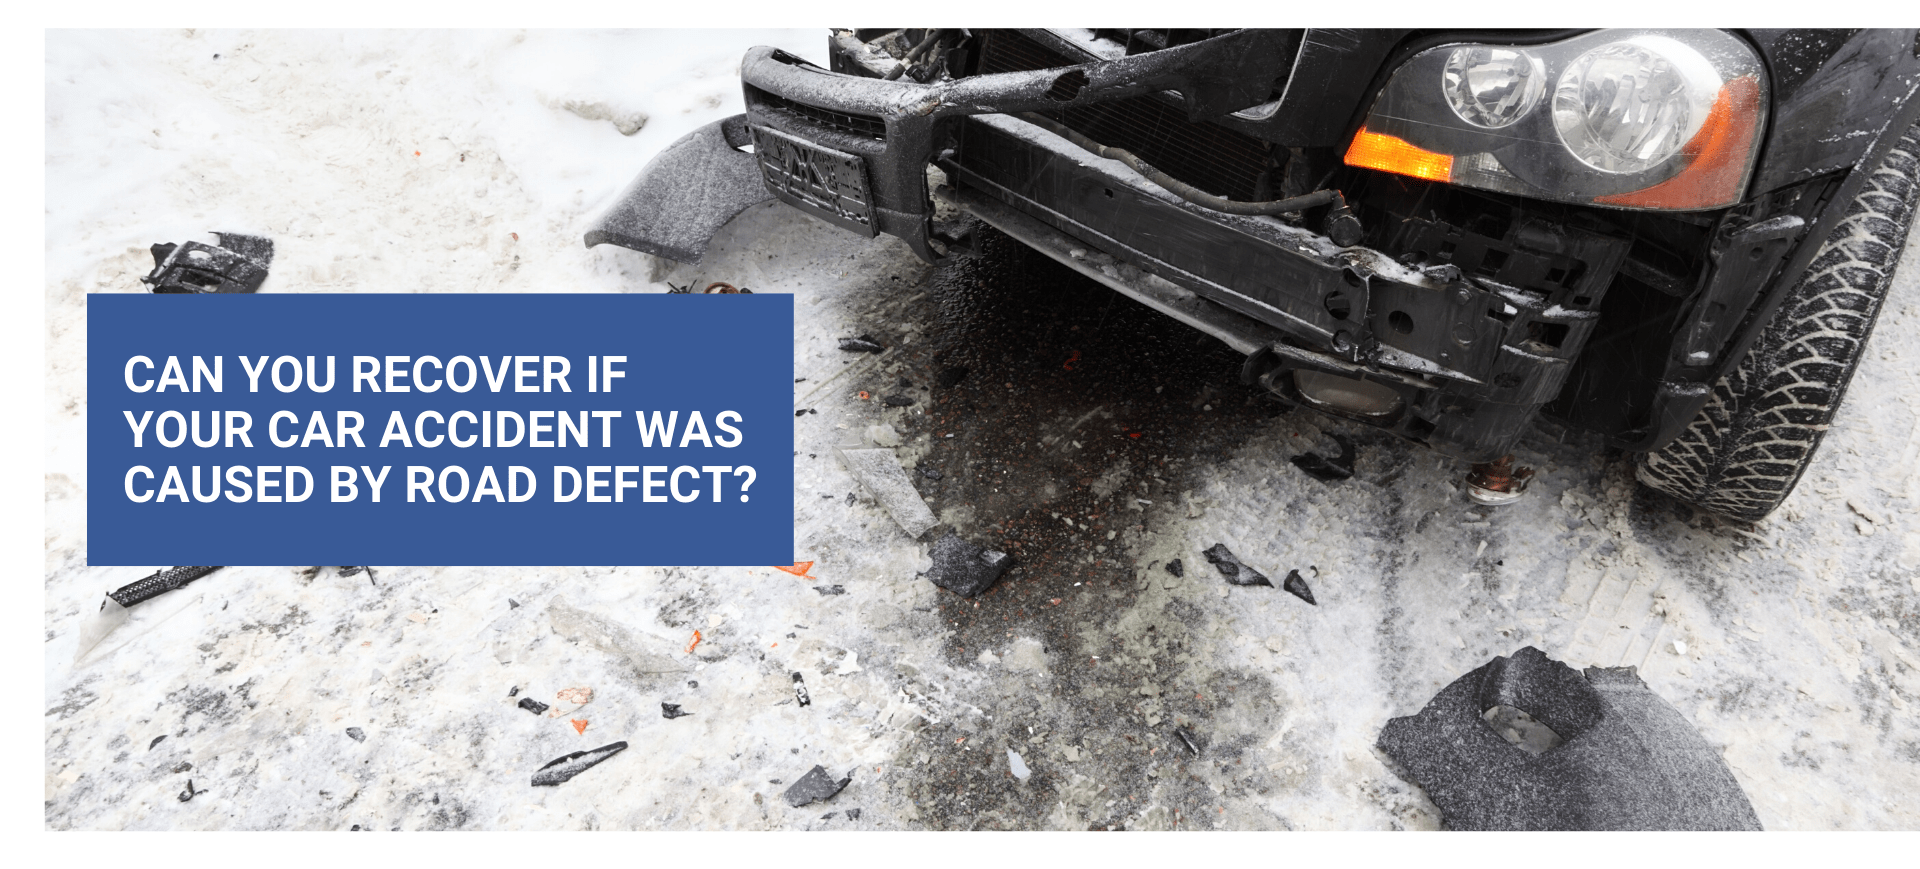 Can You Recover if Your Car Accident was Caused by a Road Defect?